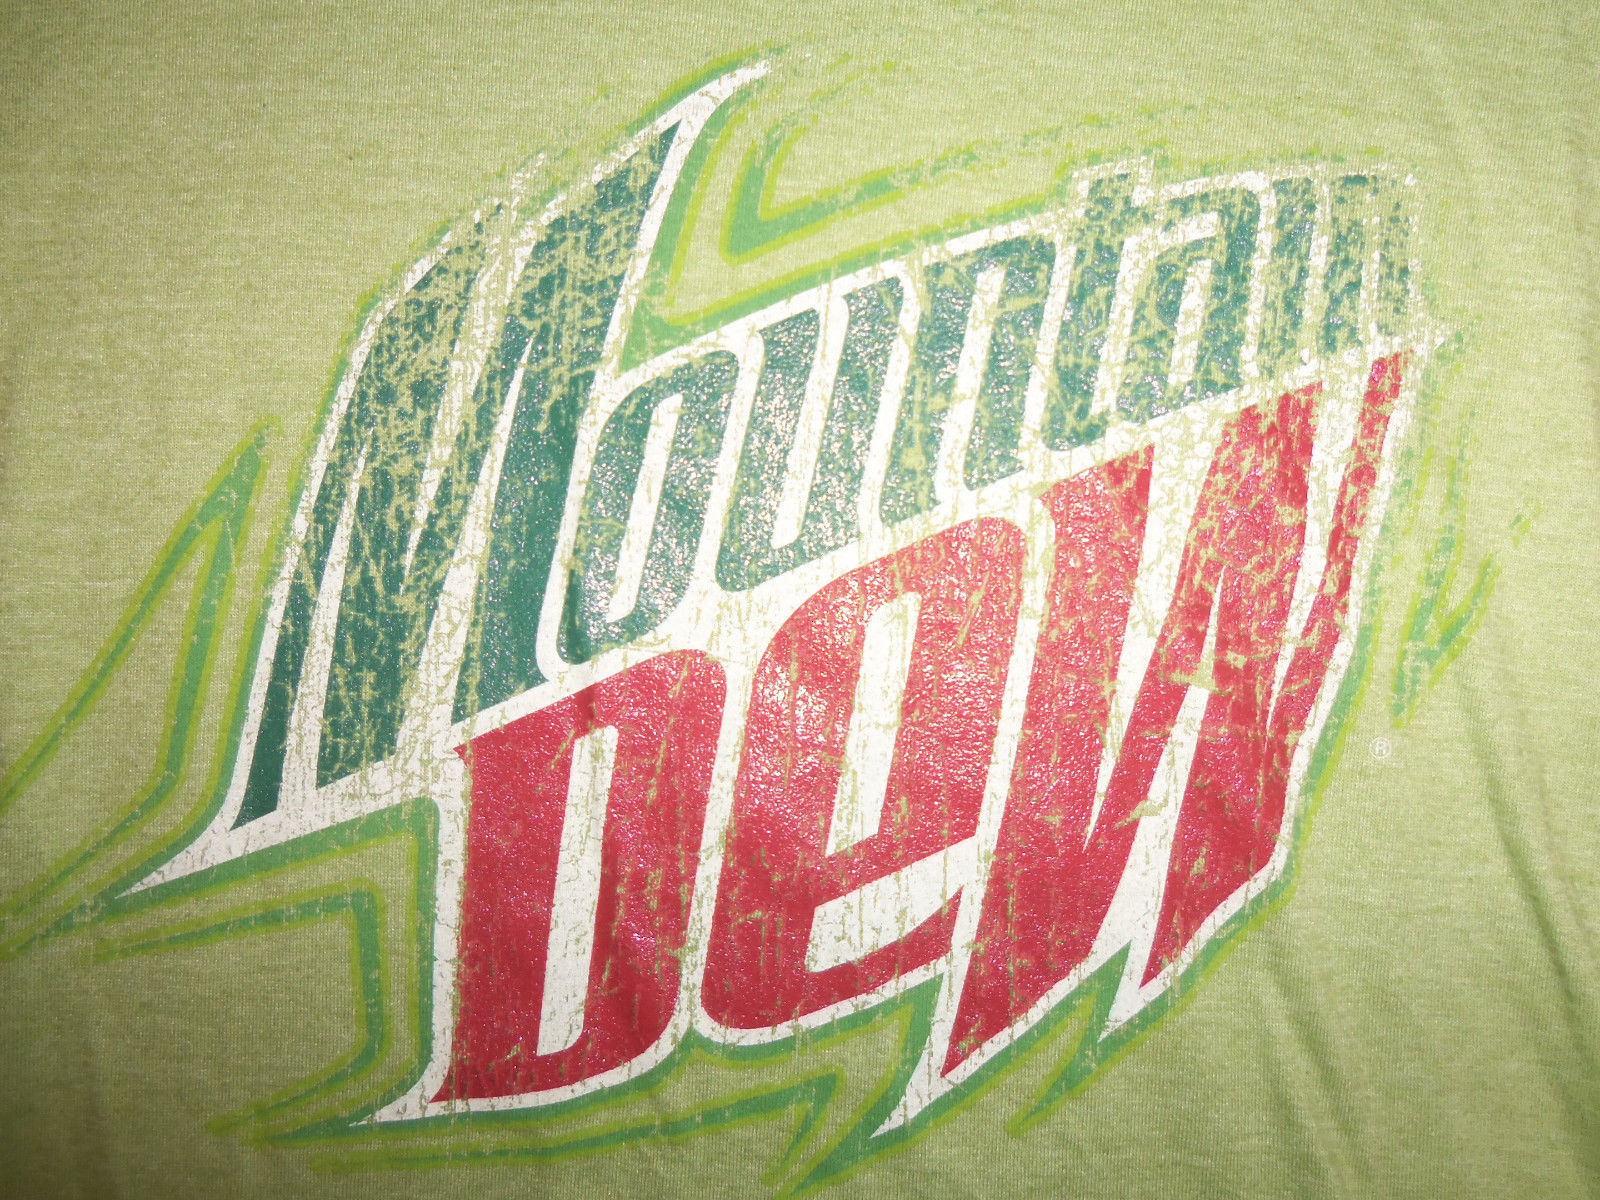 Primary image for Mountain Dew Soda Pop Beverage Green 52/48 Graphic Print T Shirt - L